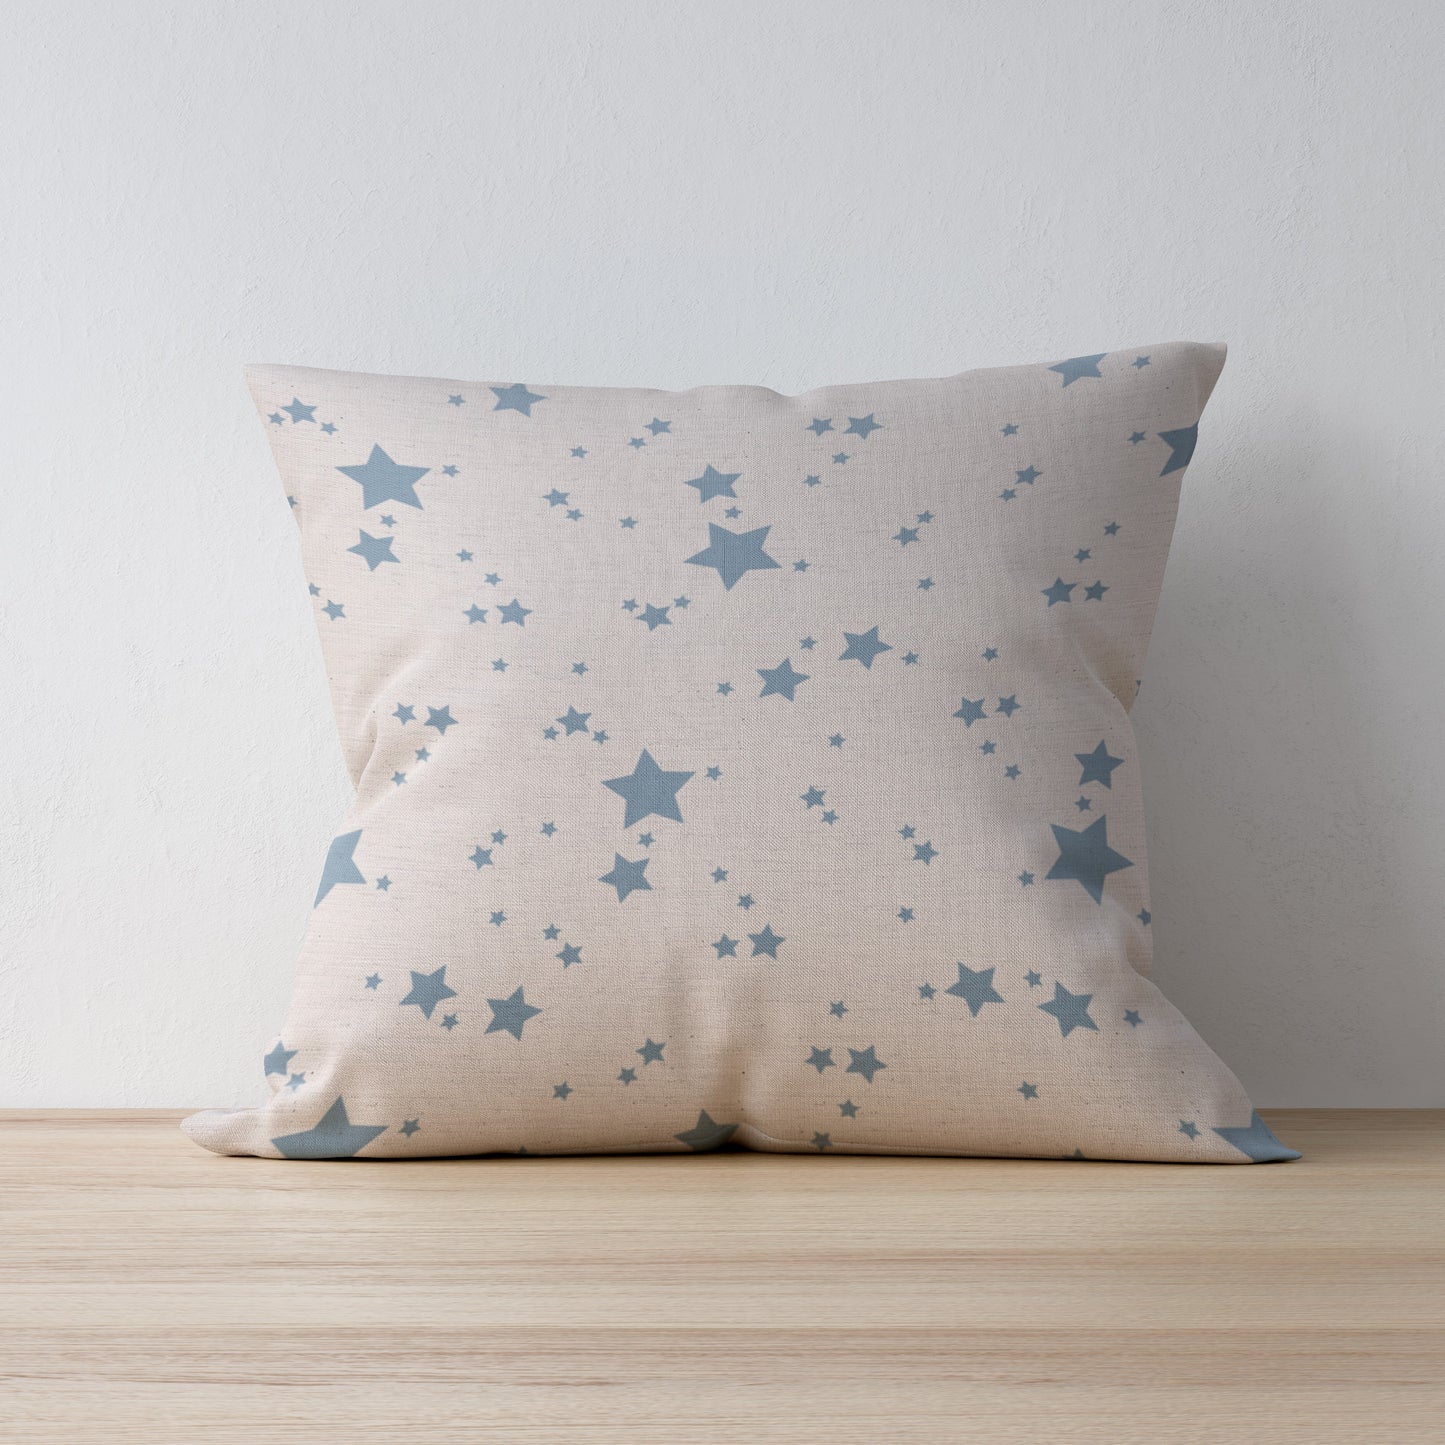 Handmade Blue Star Print Cushion - Designed and Made by F&B international - Country Homeware and Farmhouse style vintage decor